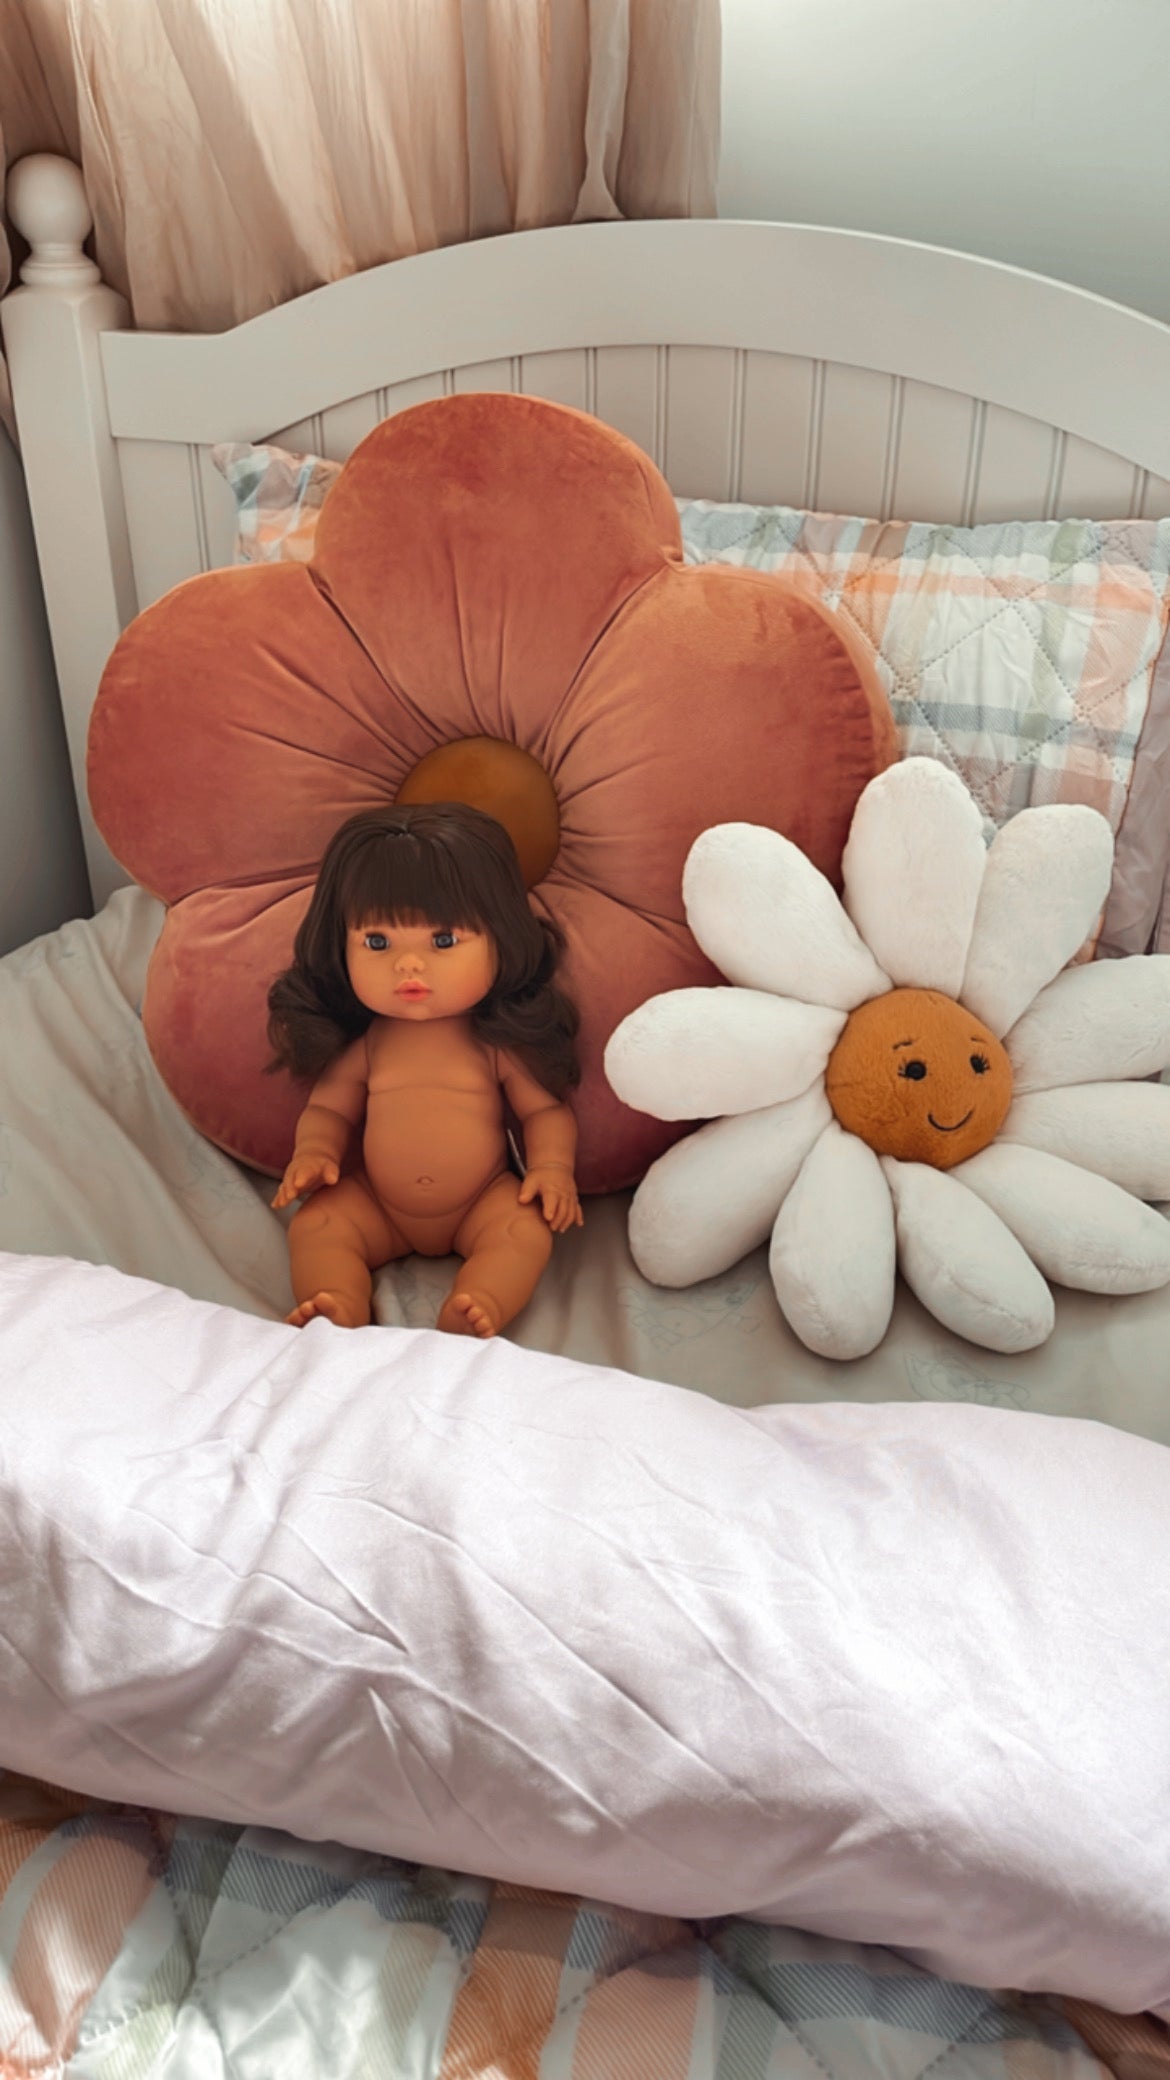 LLORENS DOLLS | MINI COLETTOS DOLL - ARIA by LLORENS DOLLS - The Playful Collective